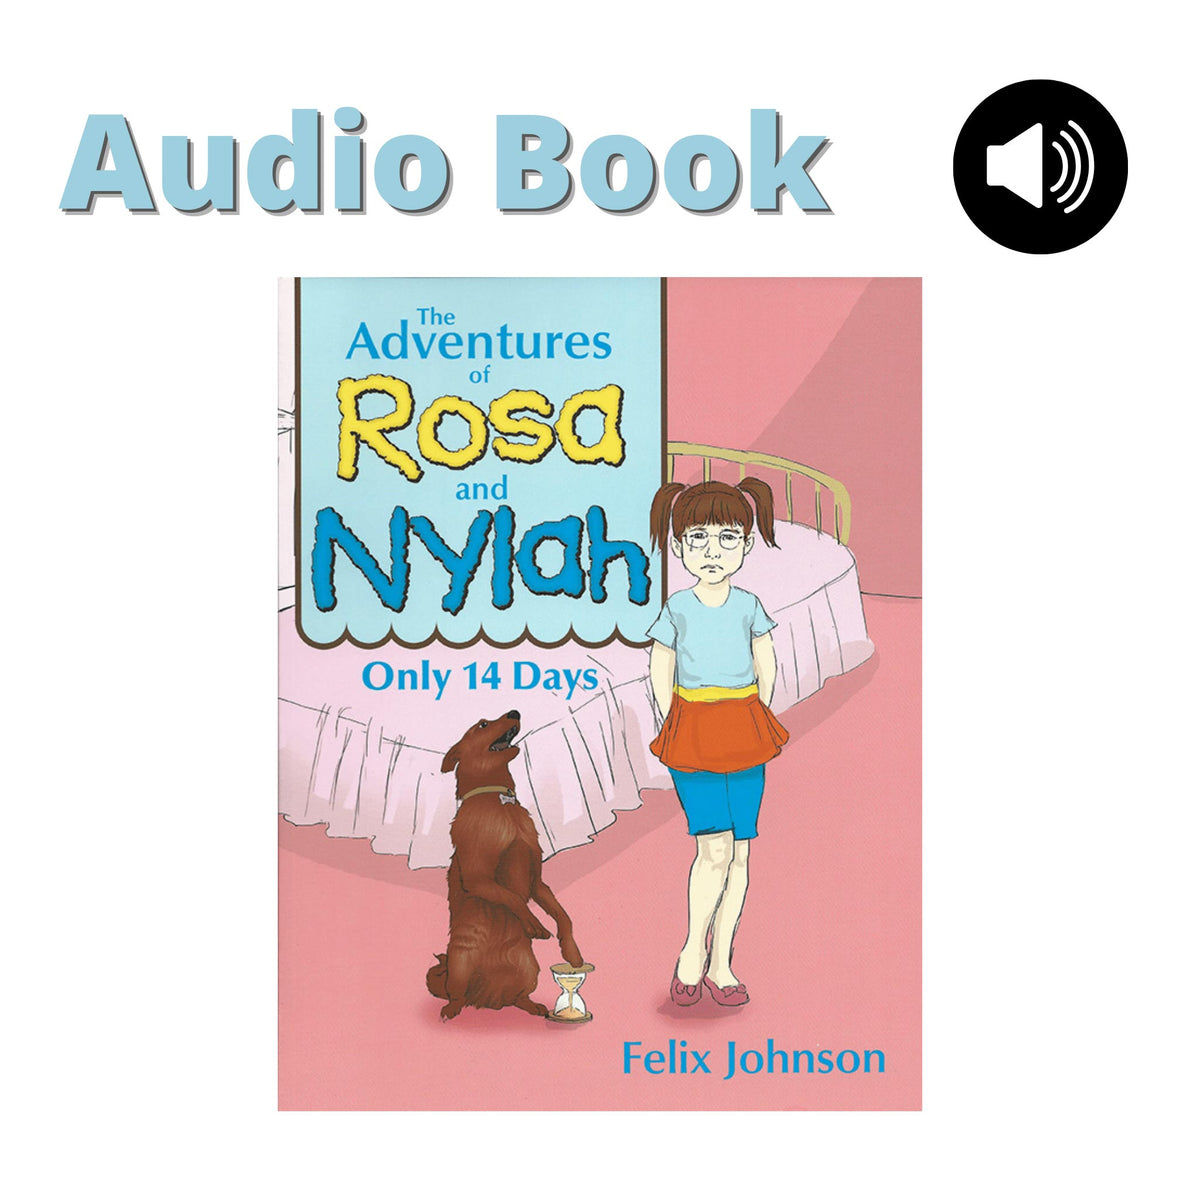 The Adventures of Rosa and Nylah available as an Audio Book